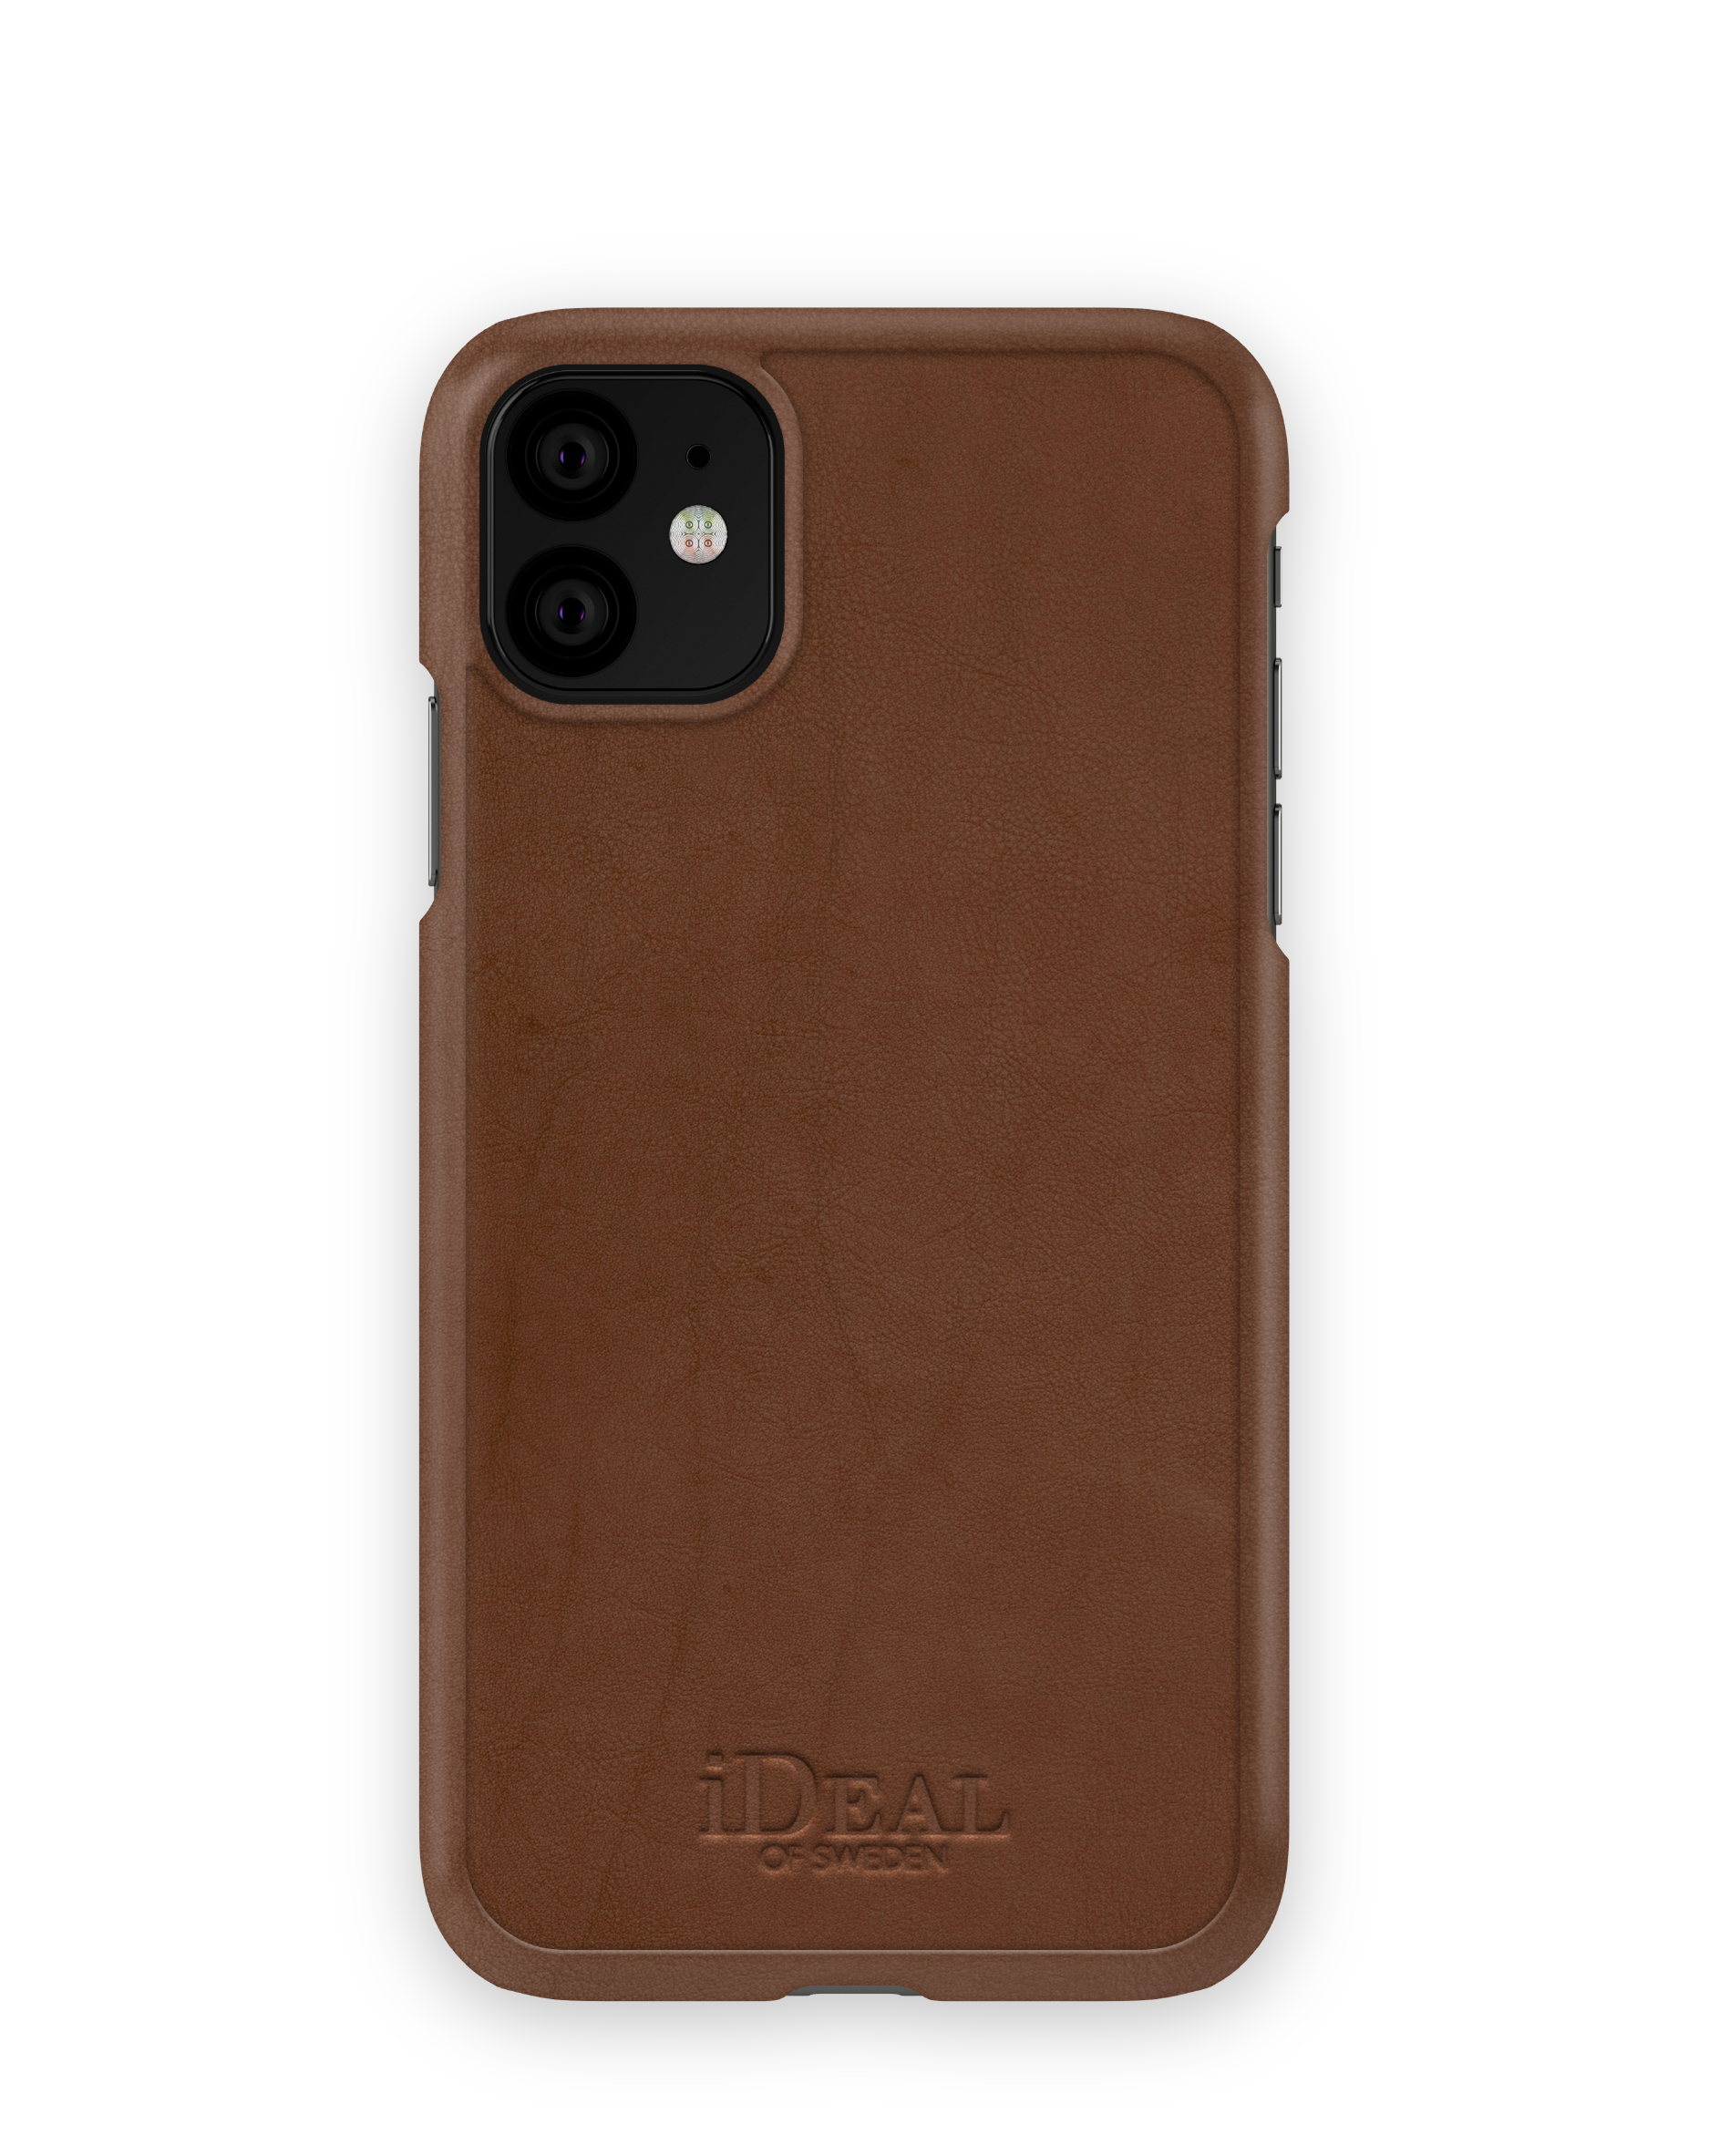 XR, Brown Apple Backcover, OF SWEDEN IDEAL 11, iPhone IDFC-I1961-COM-03, Apple, iPhone Apple